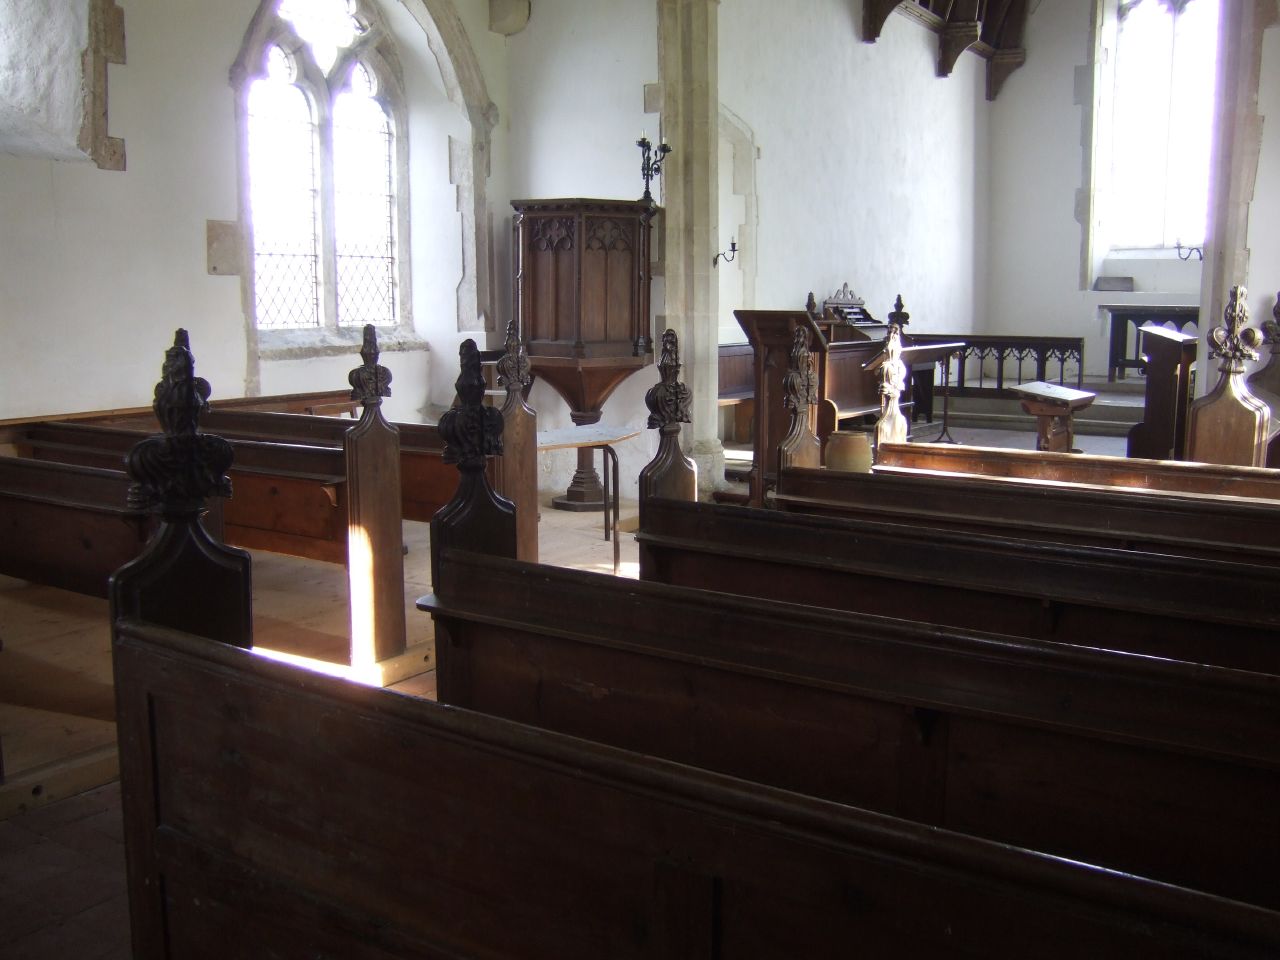 inside view of an old church with pews